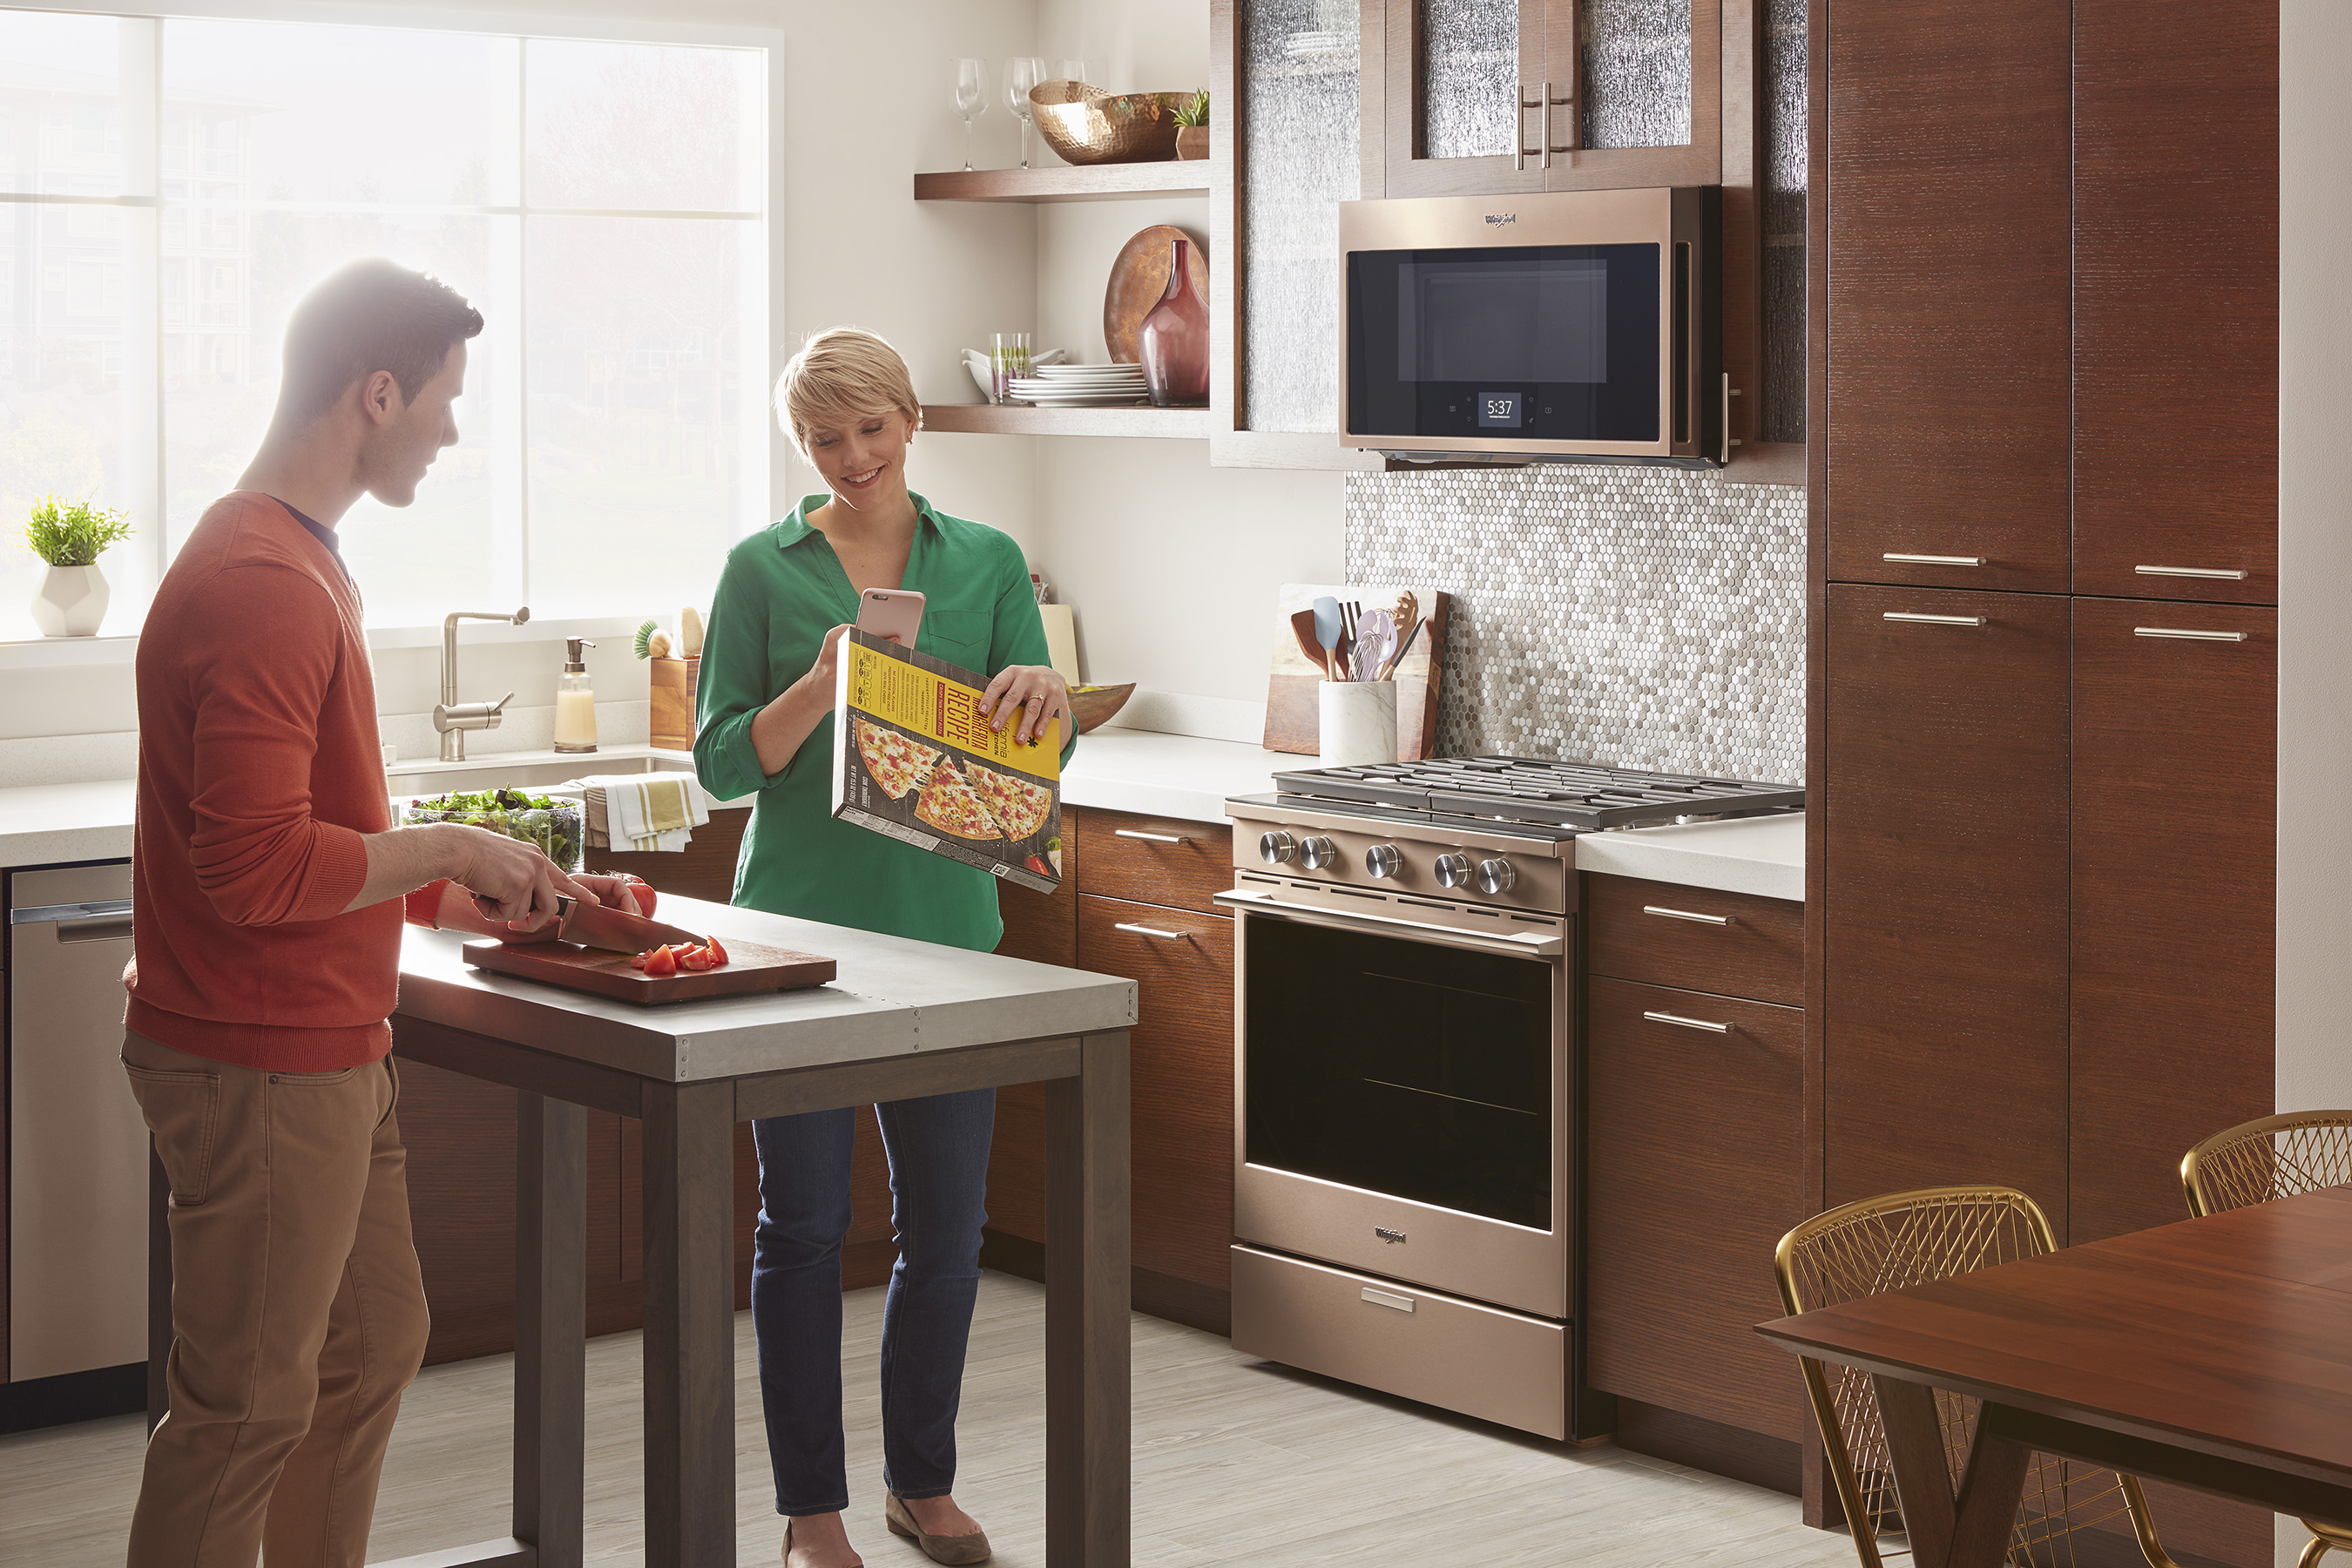 The Whirlpool® Smart Front Control Range, in Sunset Bronze finish, works with Yummly to help cut out routine steps to get dinner on the table quickly and make mealtime easier, better and faster.